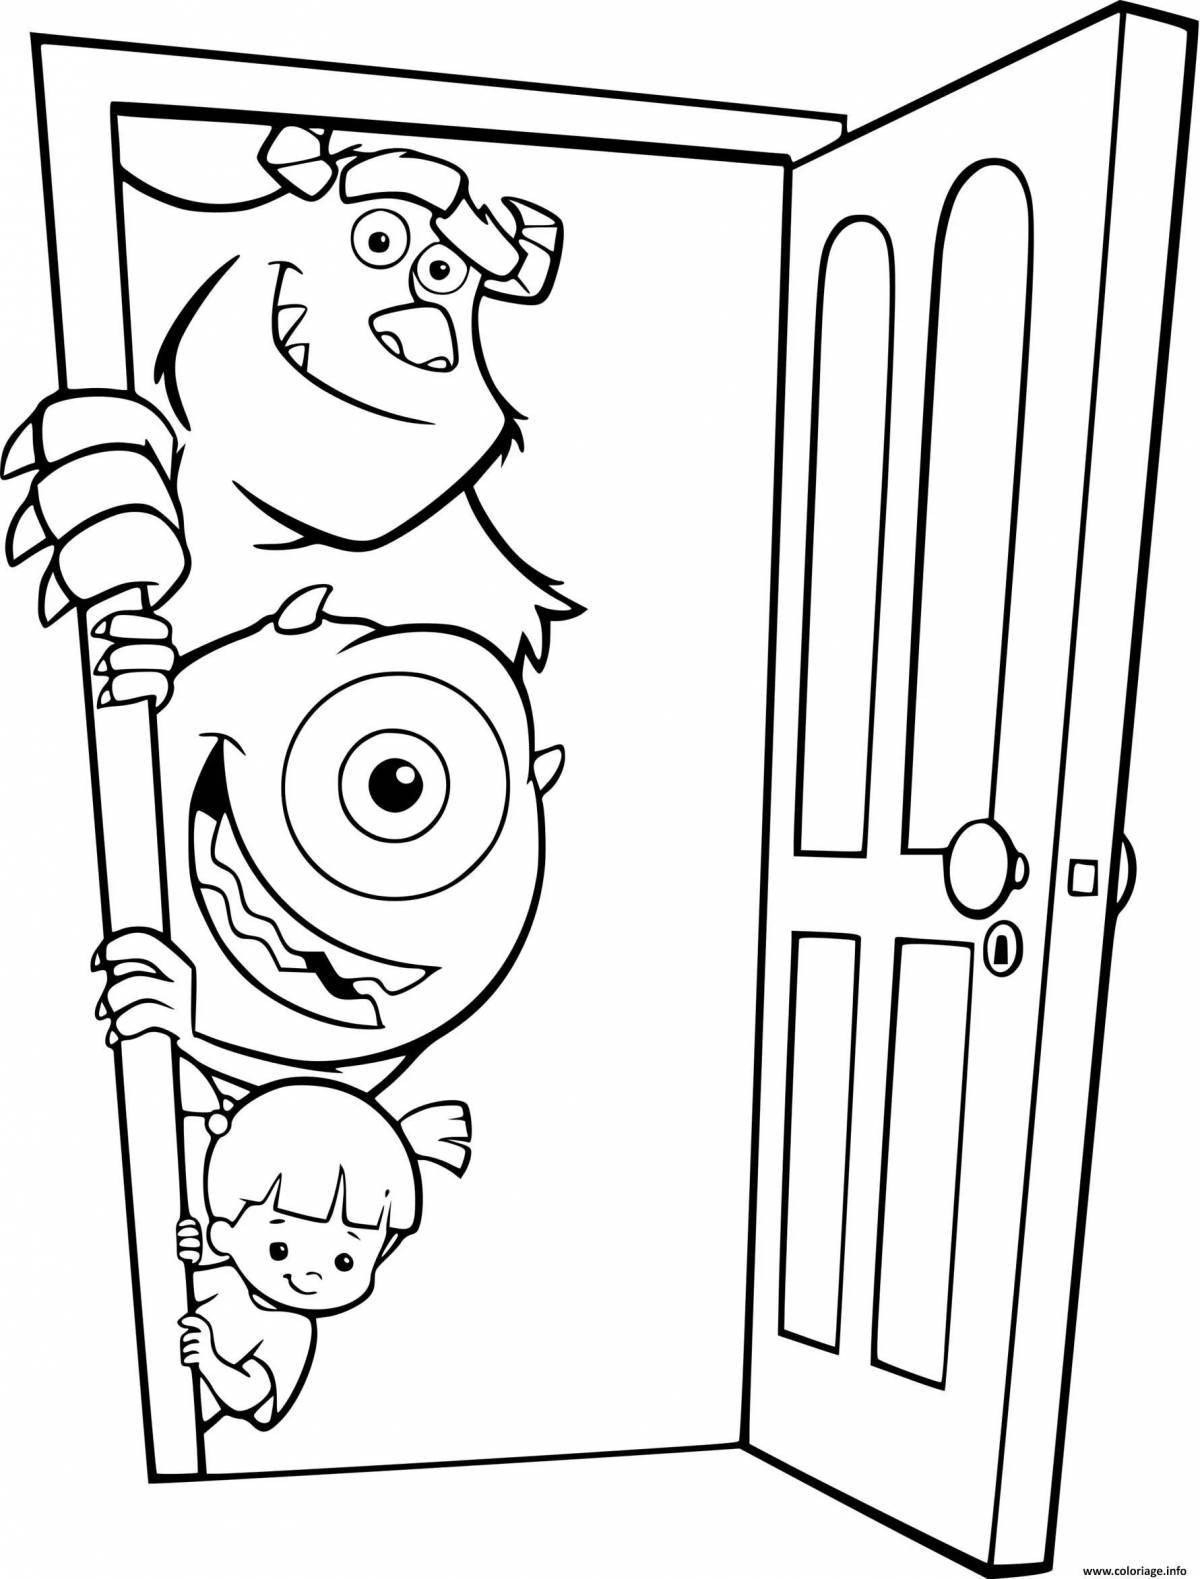 Shocking monsters at the door coloring book